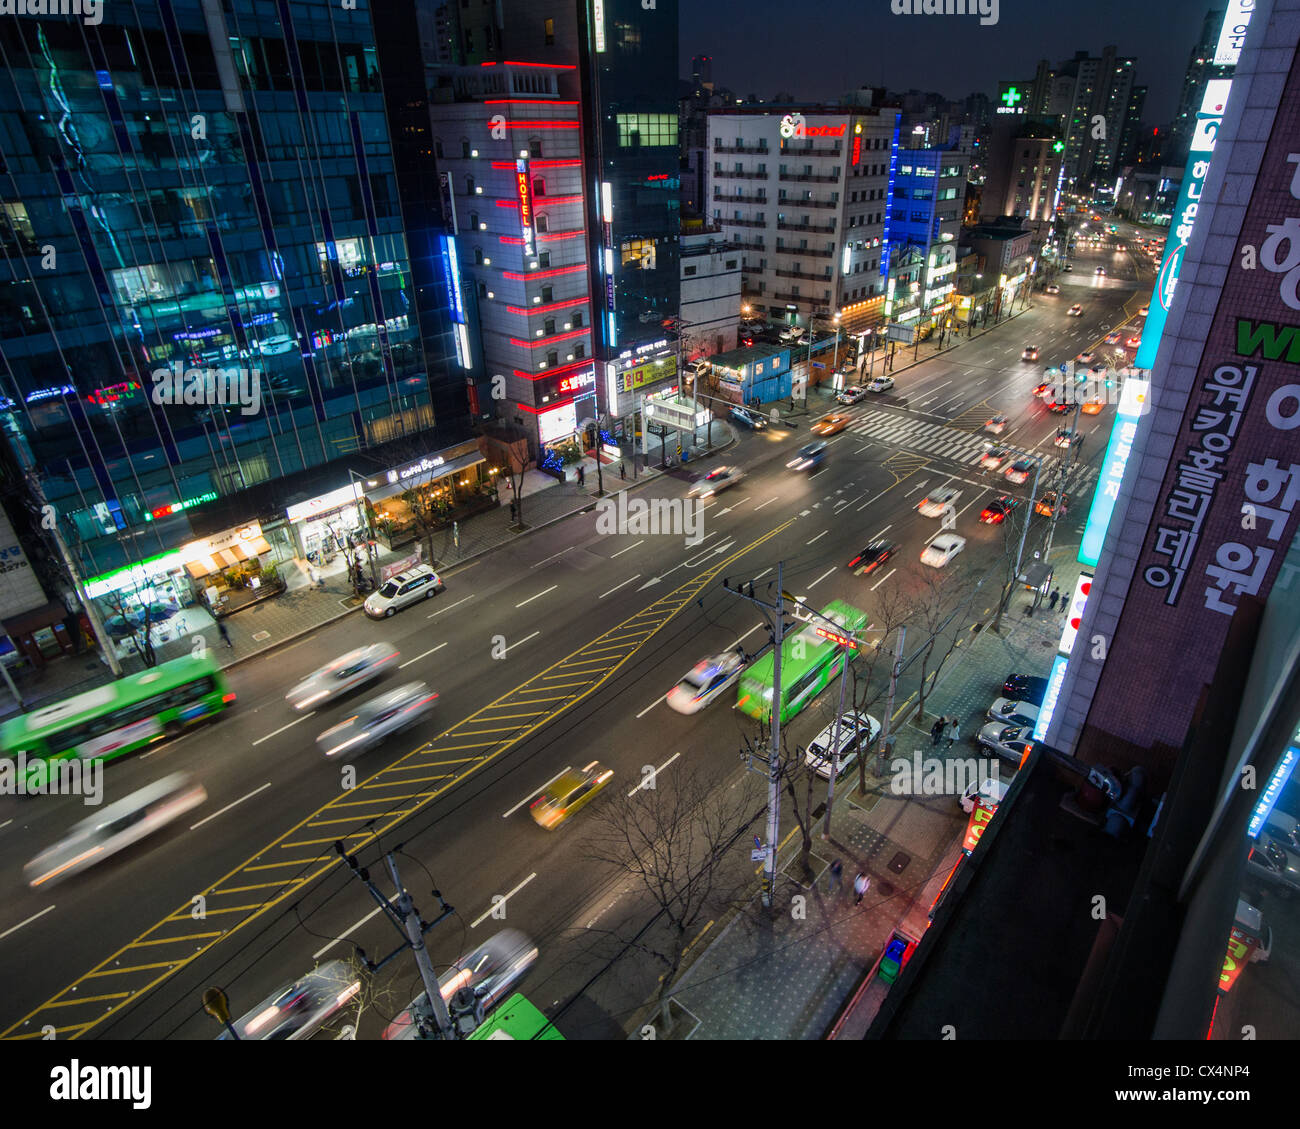 City lights in the Shinchon district of Seoul, South Korea Stock Photo